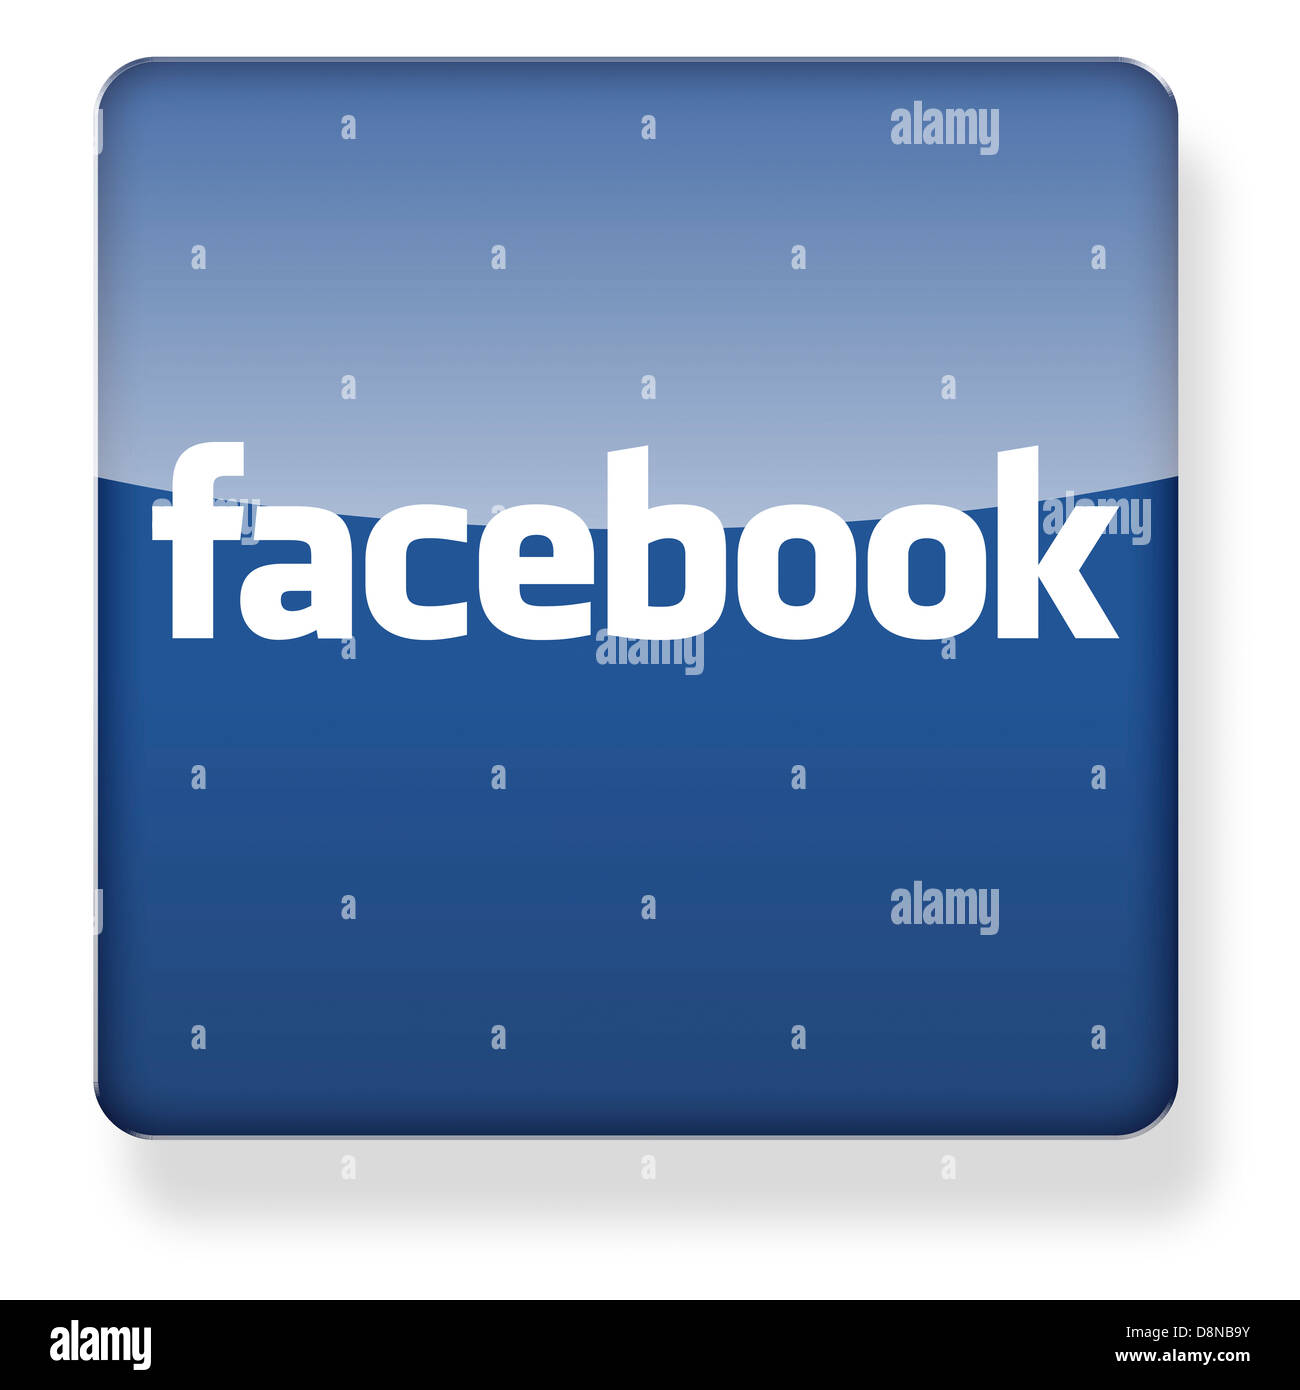 Facebook logo as an app icon. Clipping path included. Stock Photo